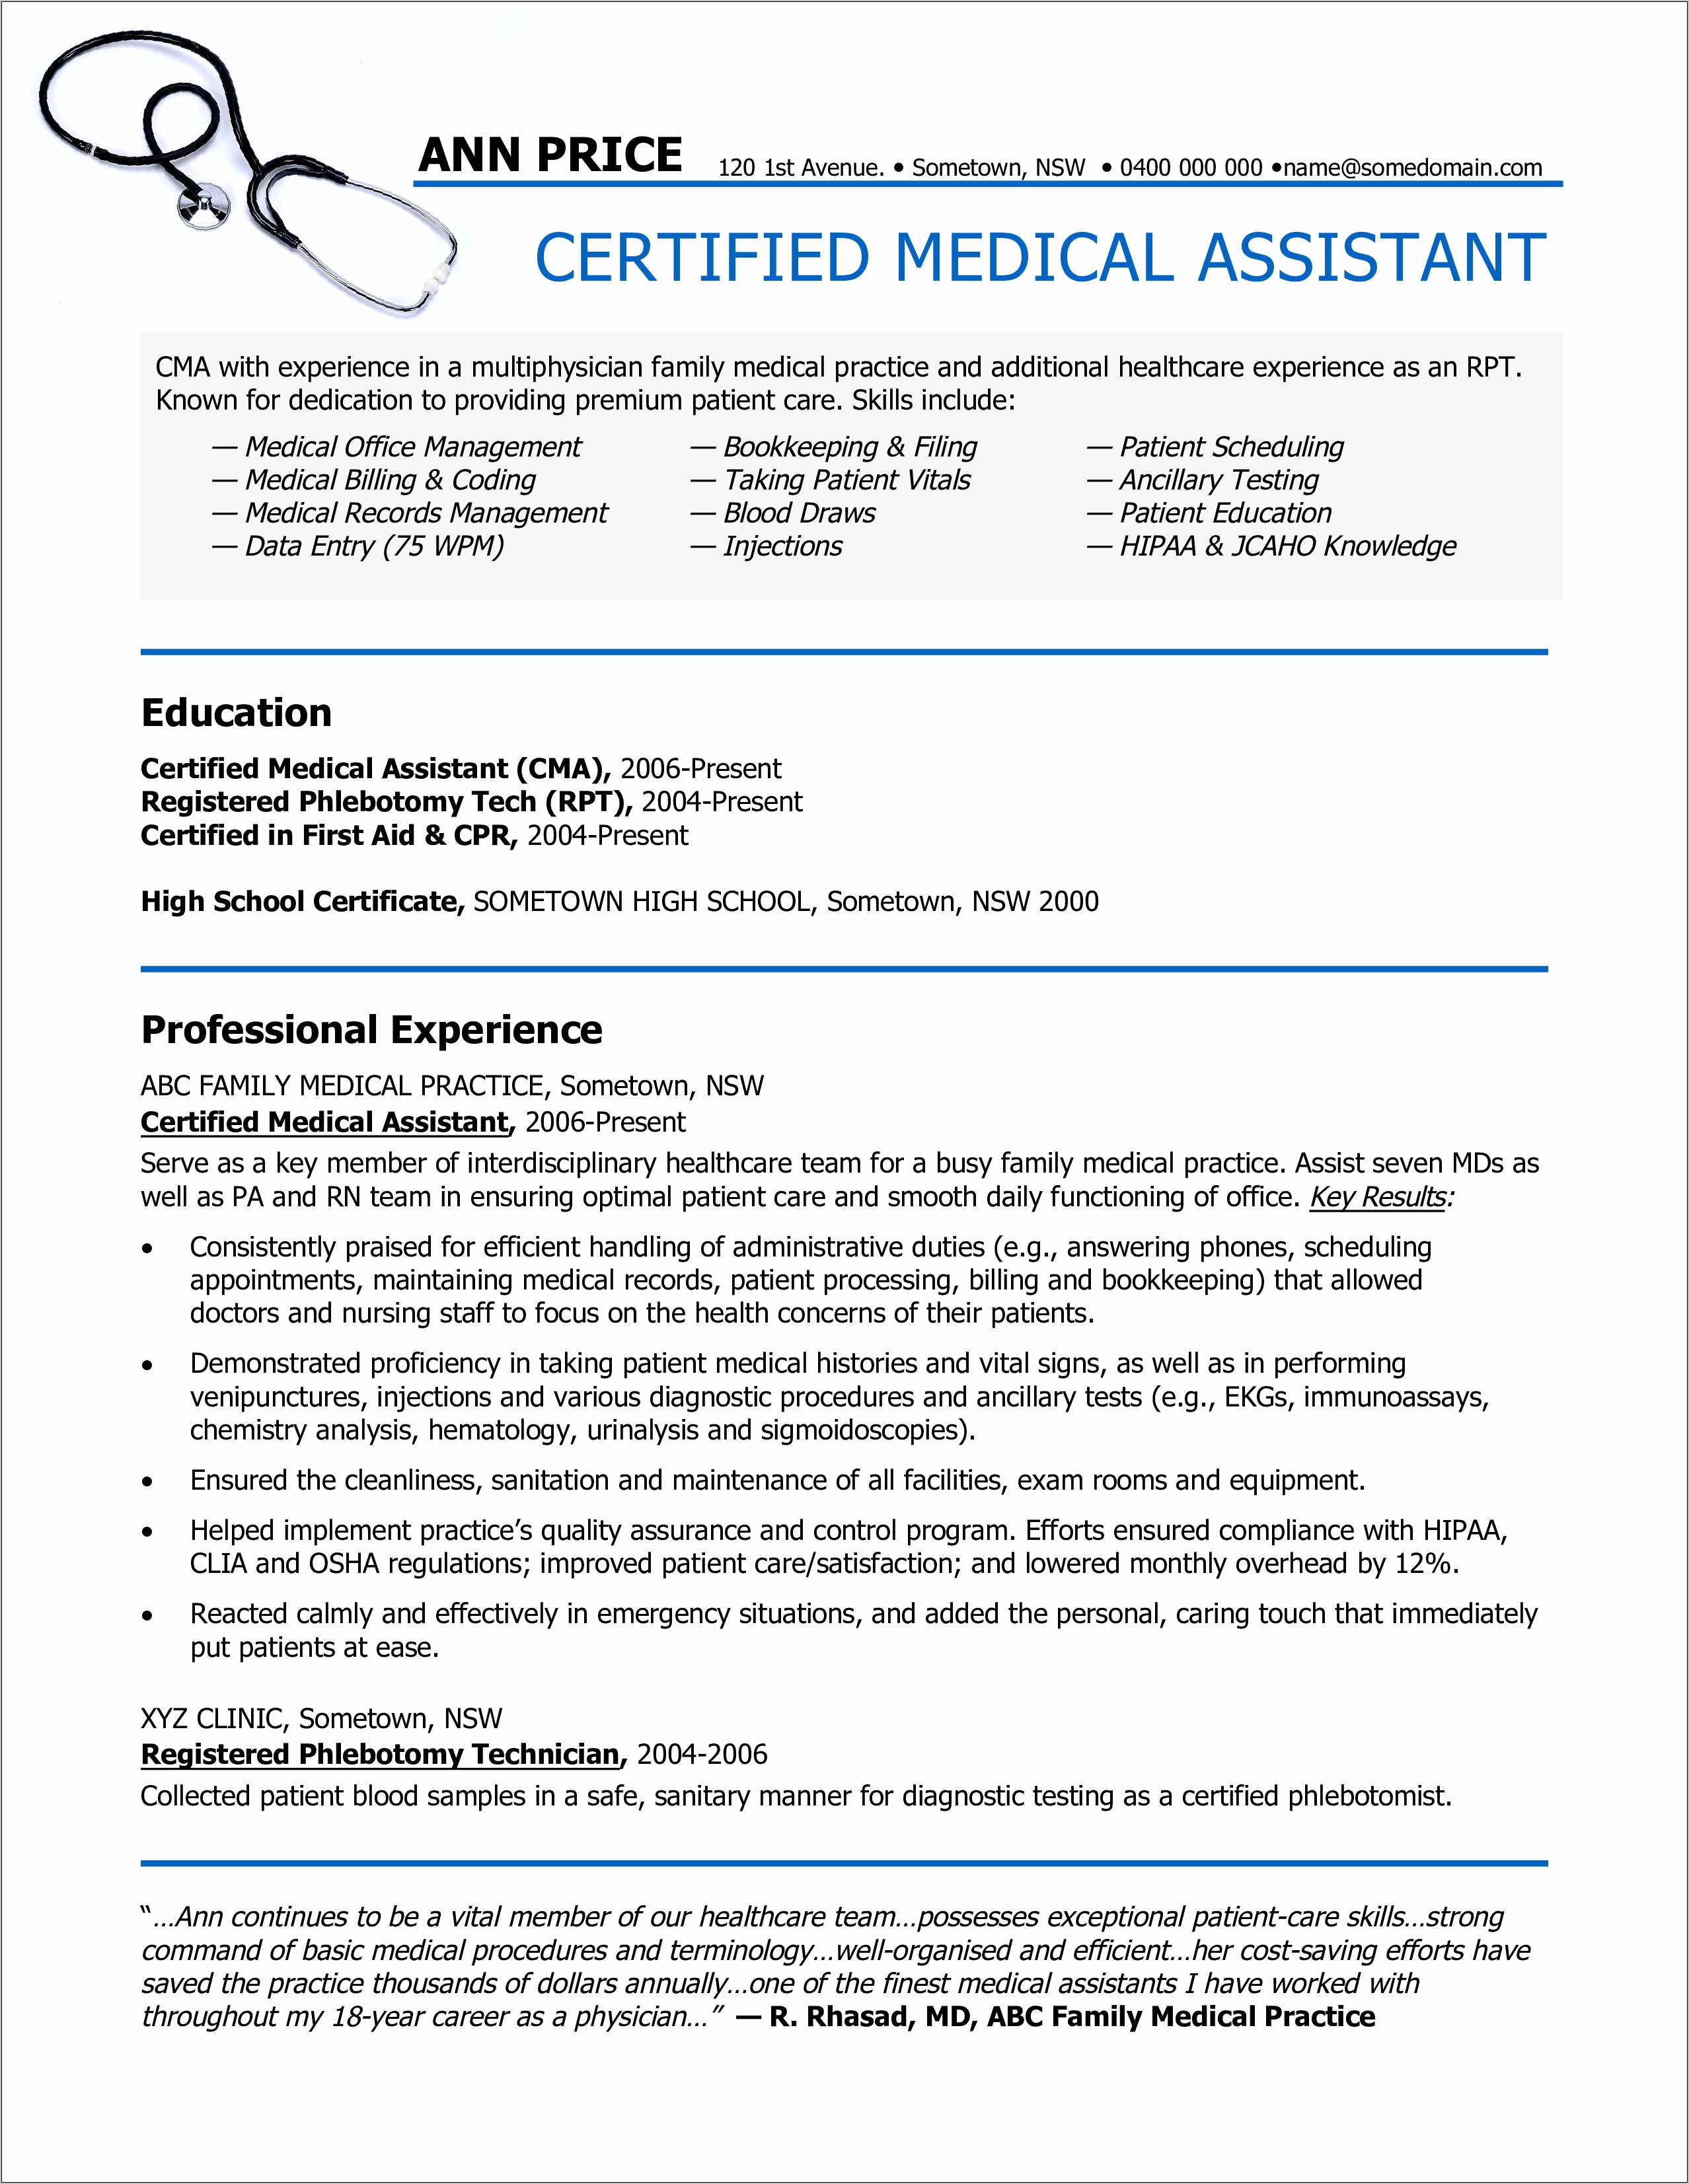 Example Of Medical Billing And Coding Resume